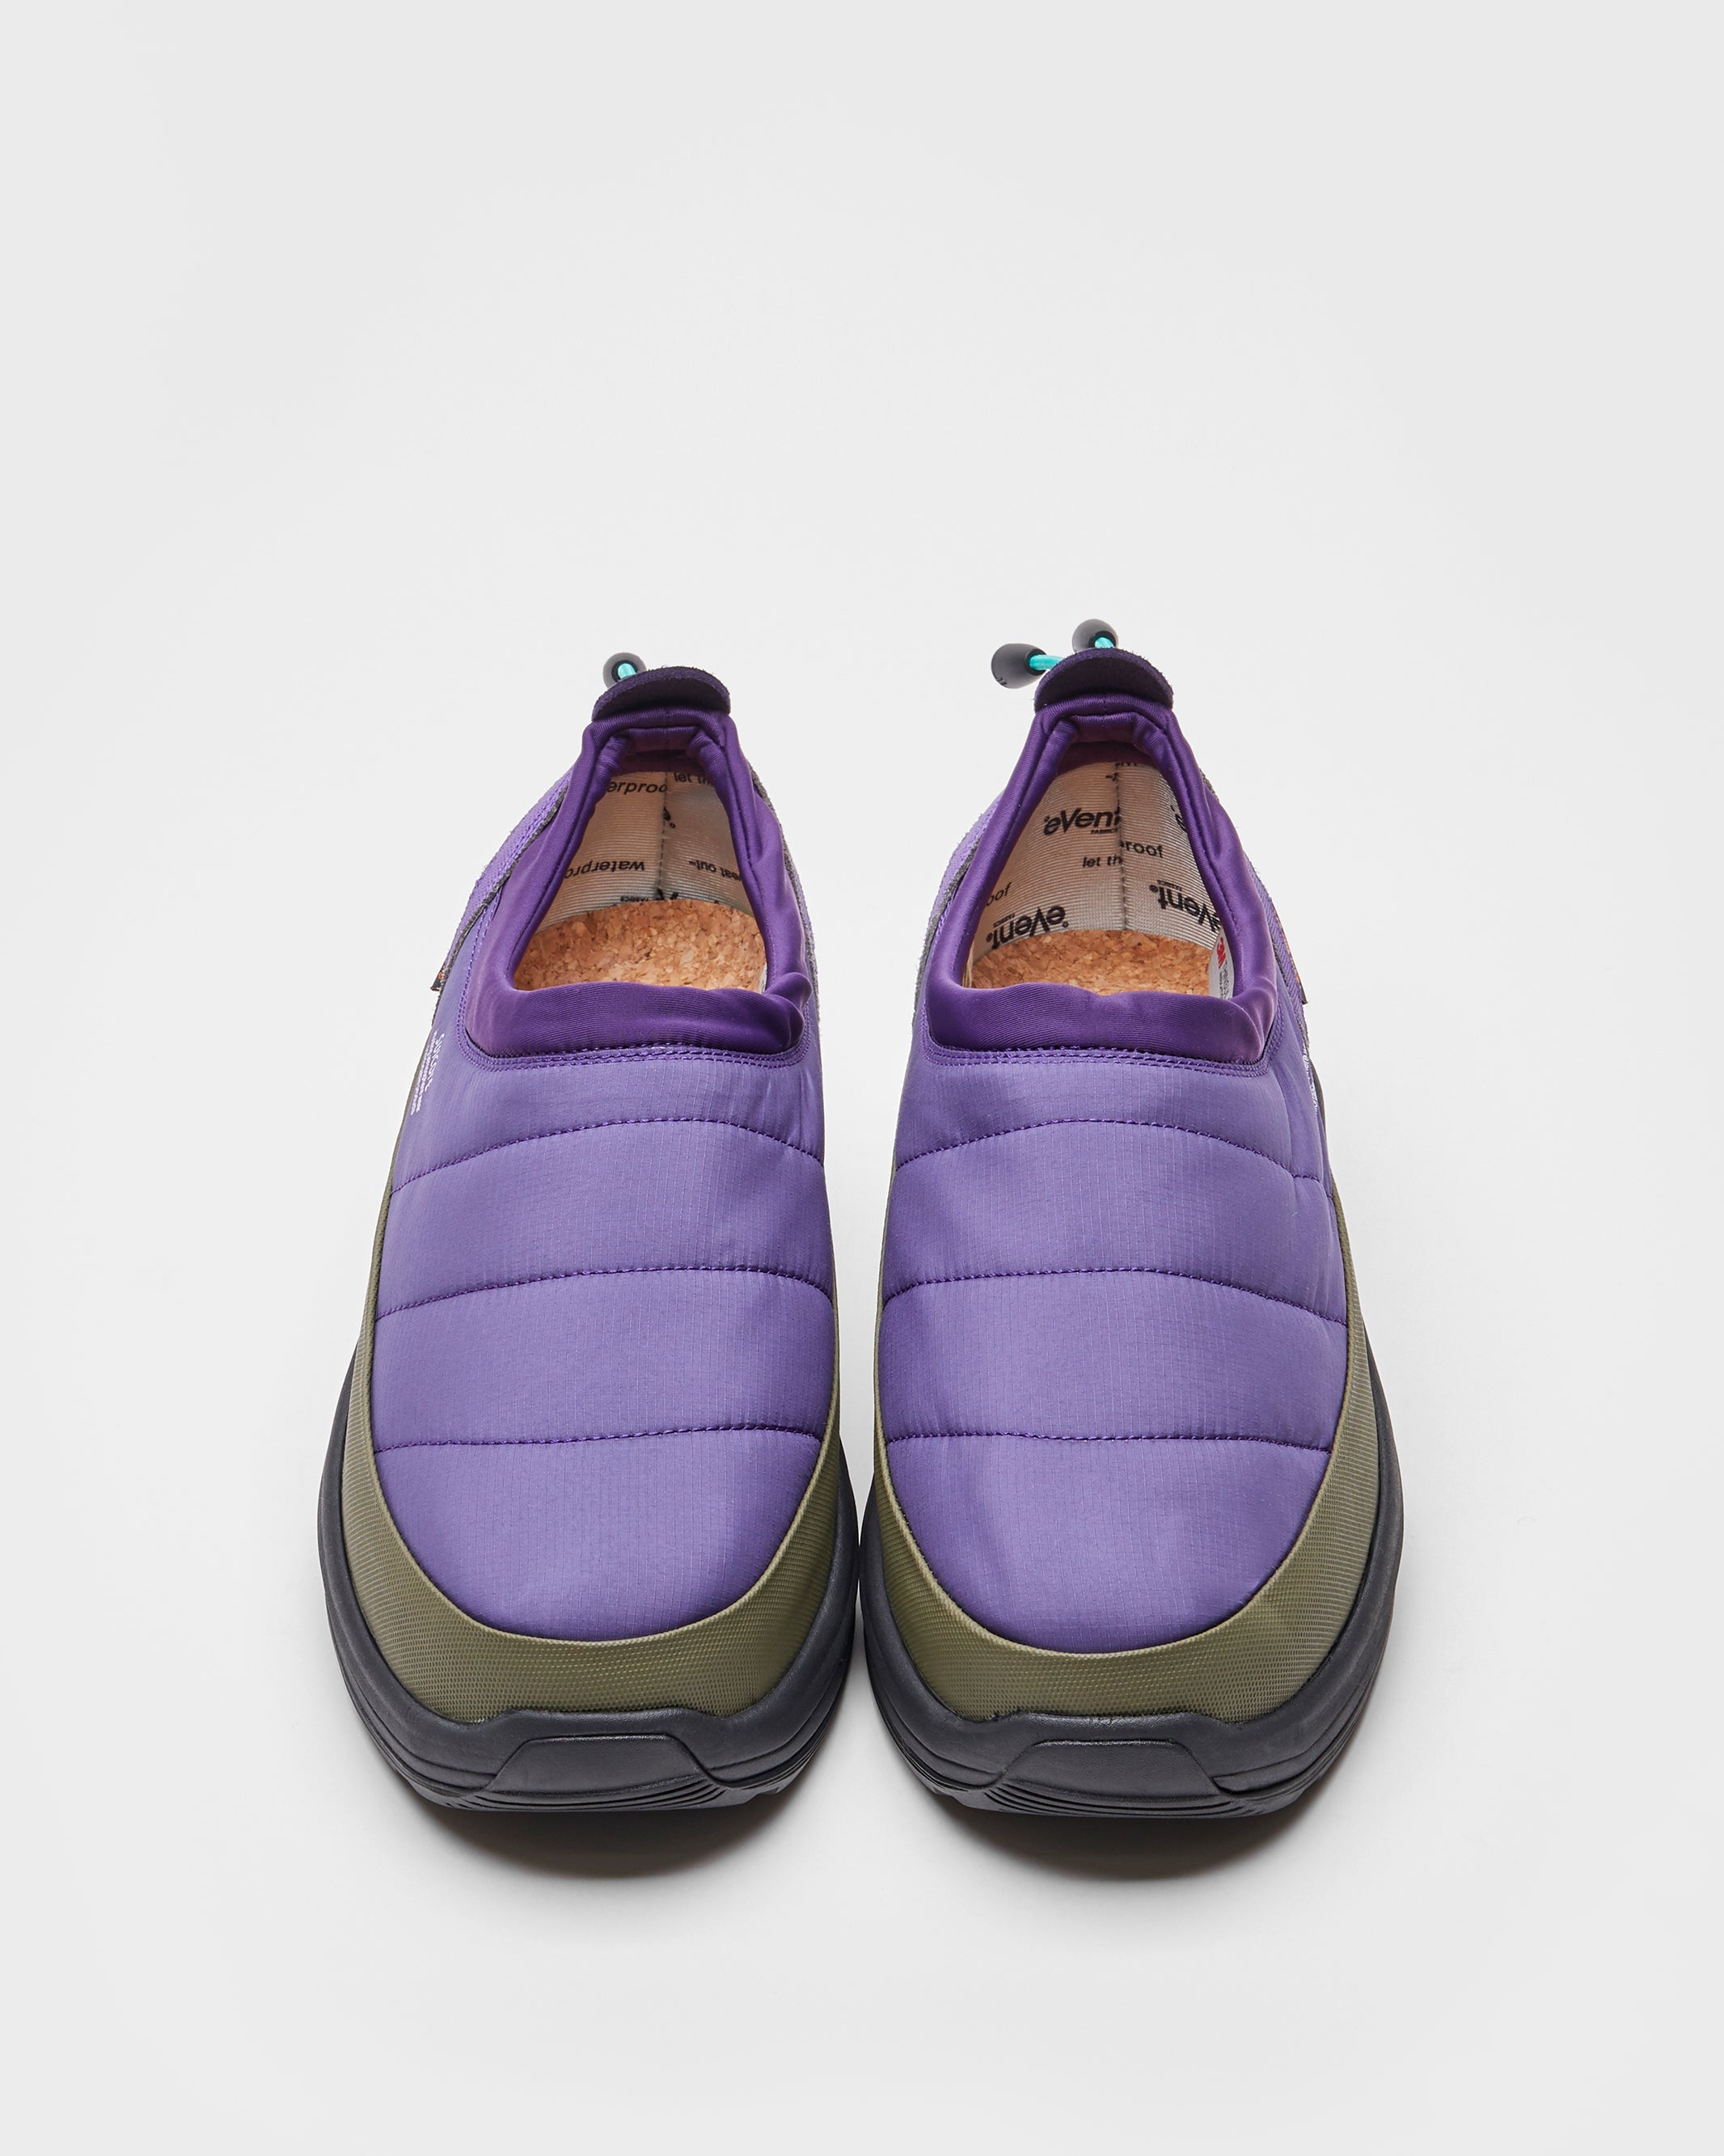 SUICOKE PEPPER-mod-ev in Purple/Black OG-235MOD-EV | Shop from eightywingold an official brand partner for SUICOKE Canada and US.